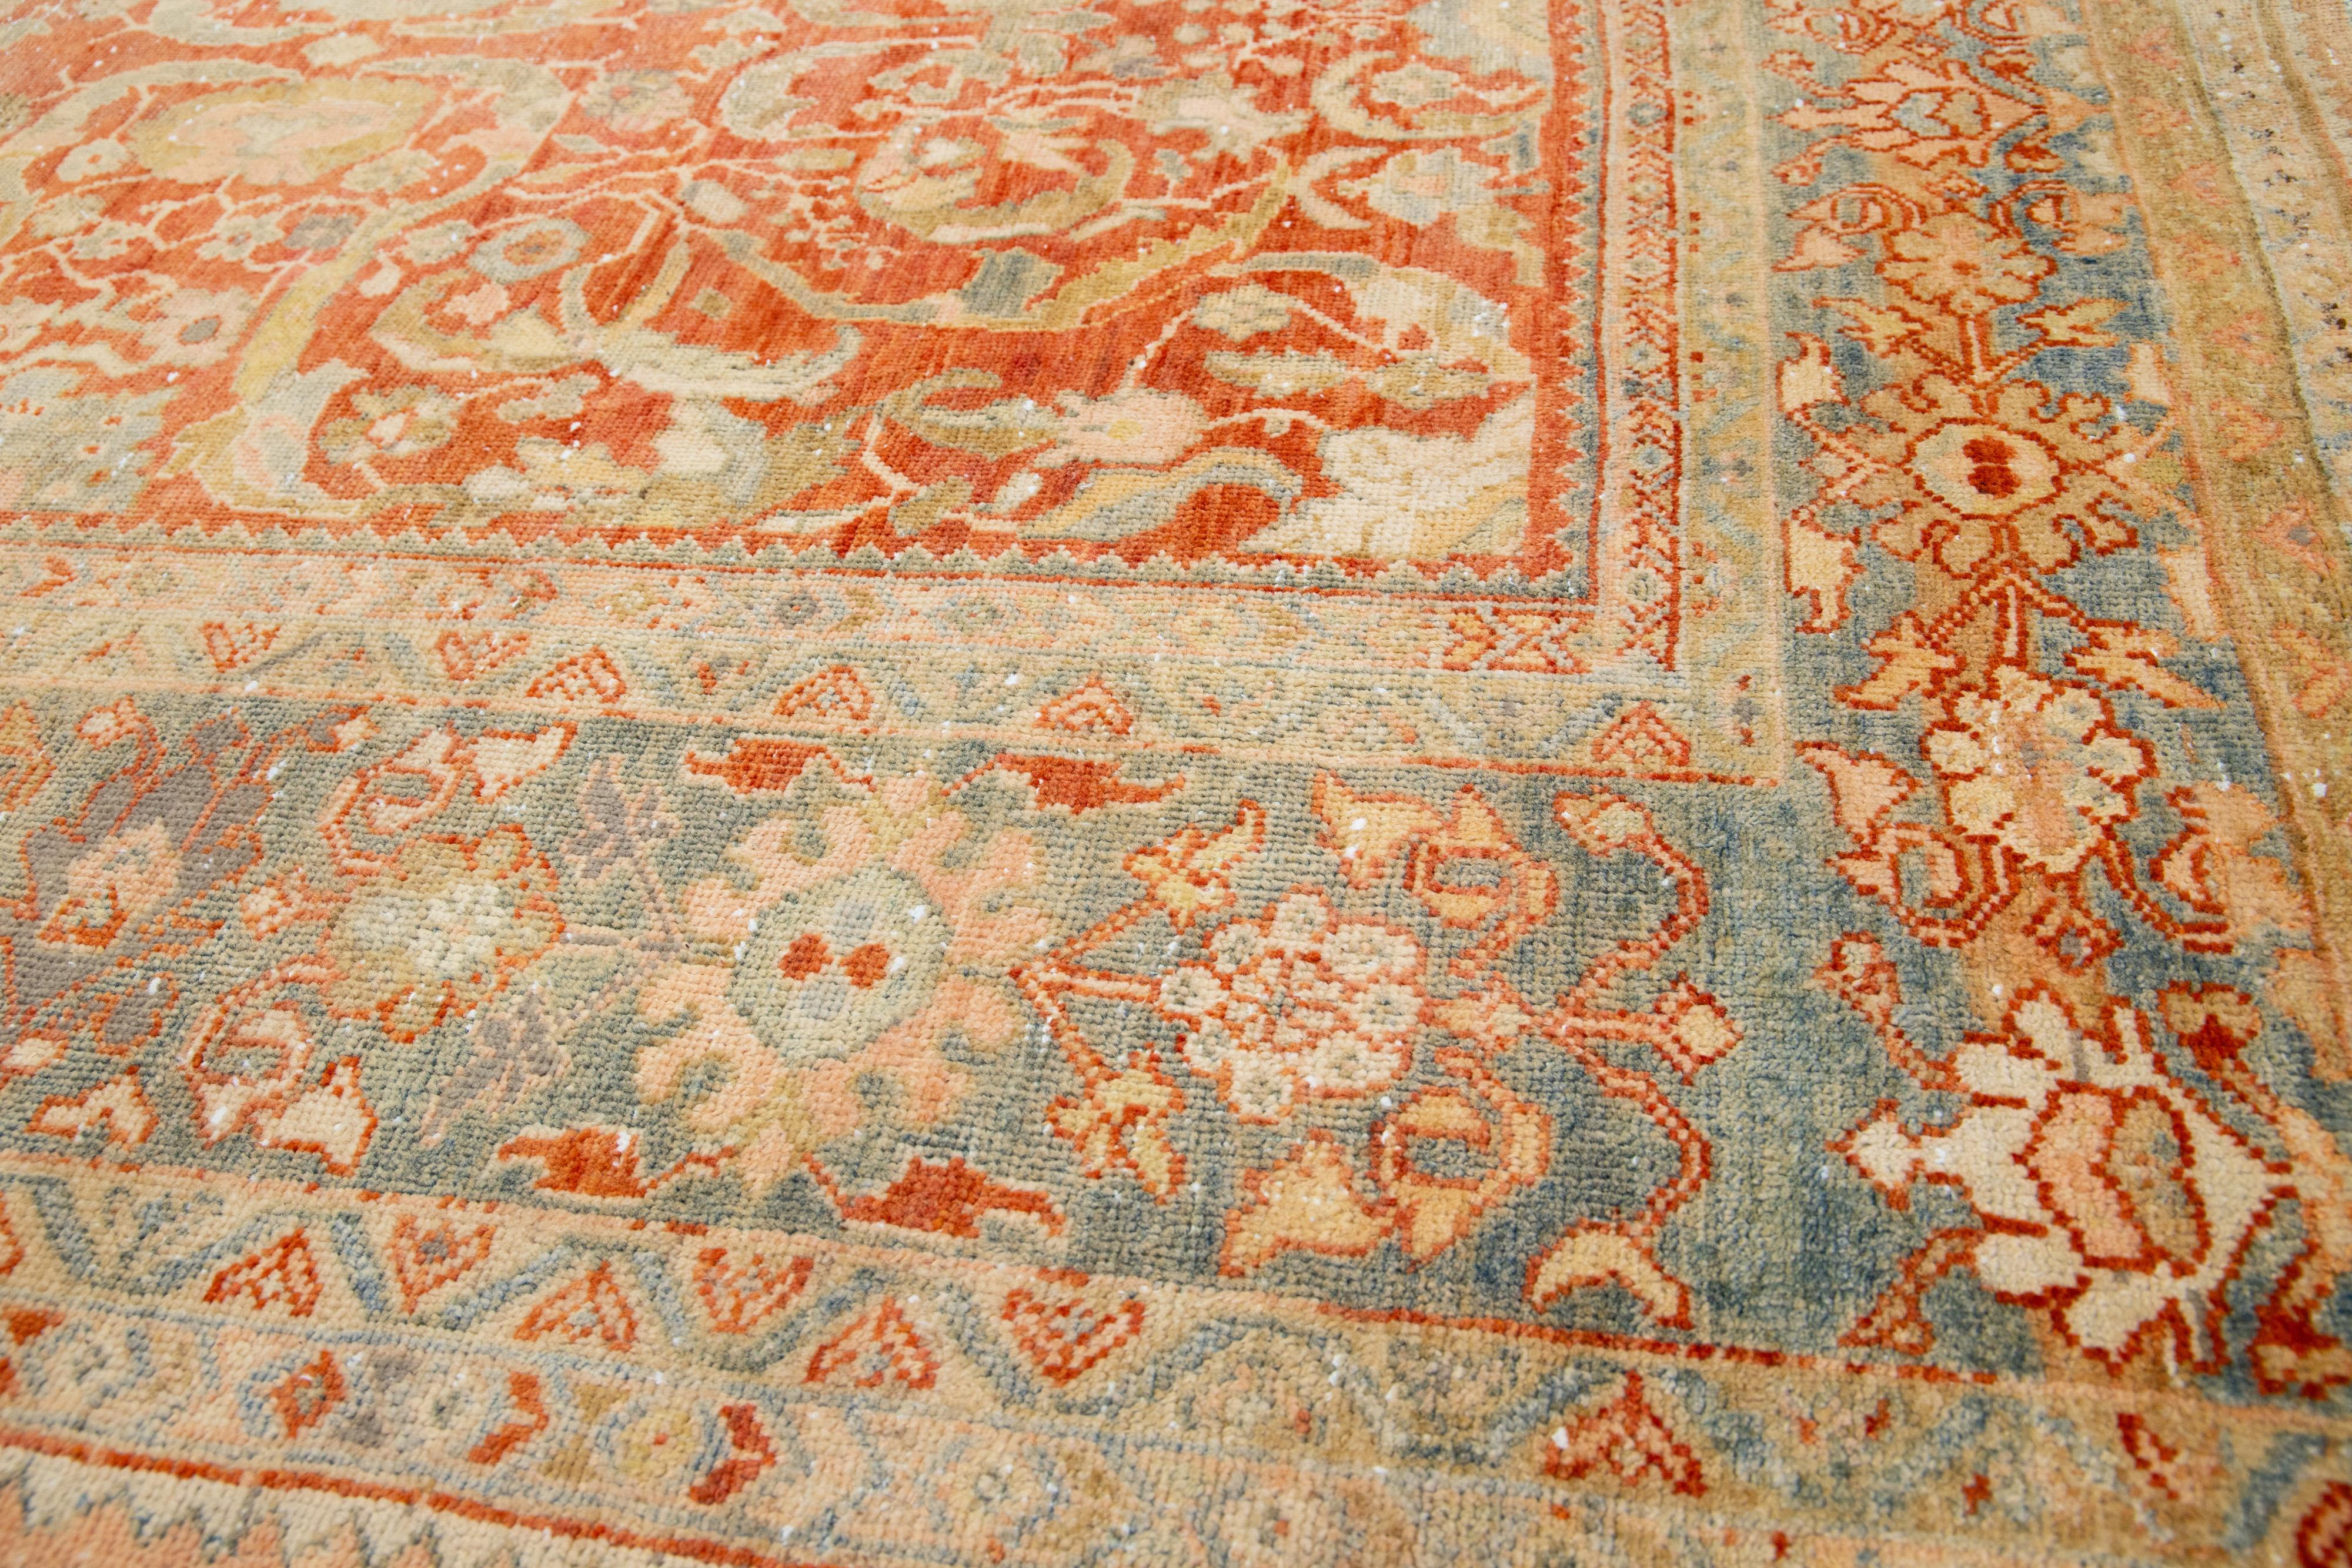 1920s Antique Persian Heriz Wool Rug In Rust With Allover Floral Design  For Sale 2